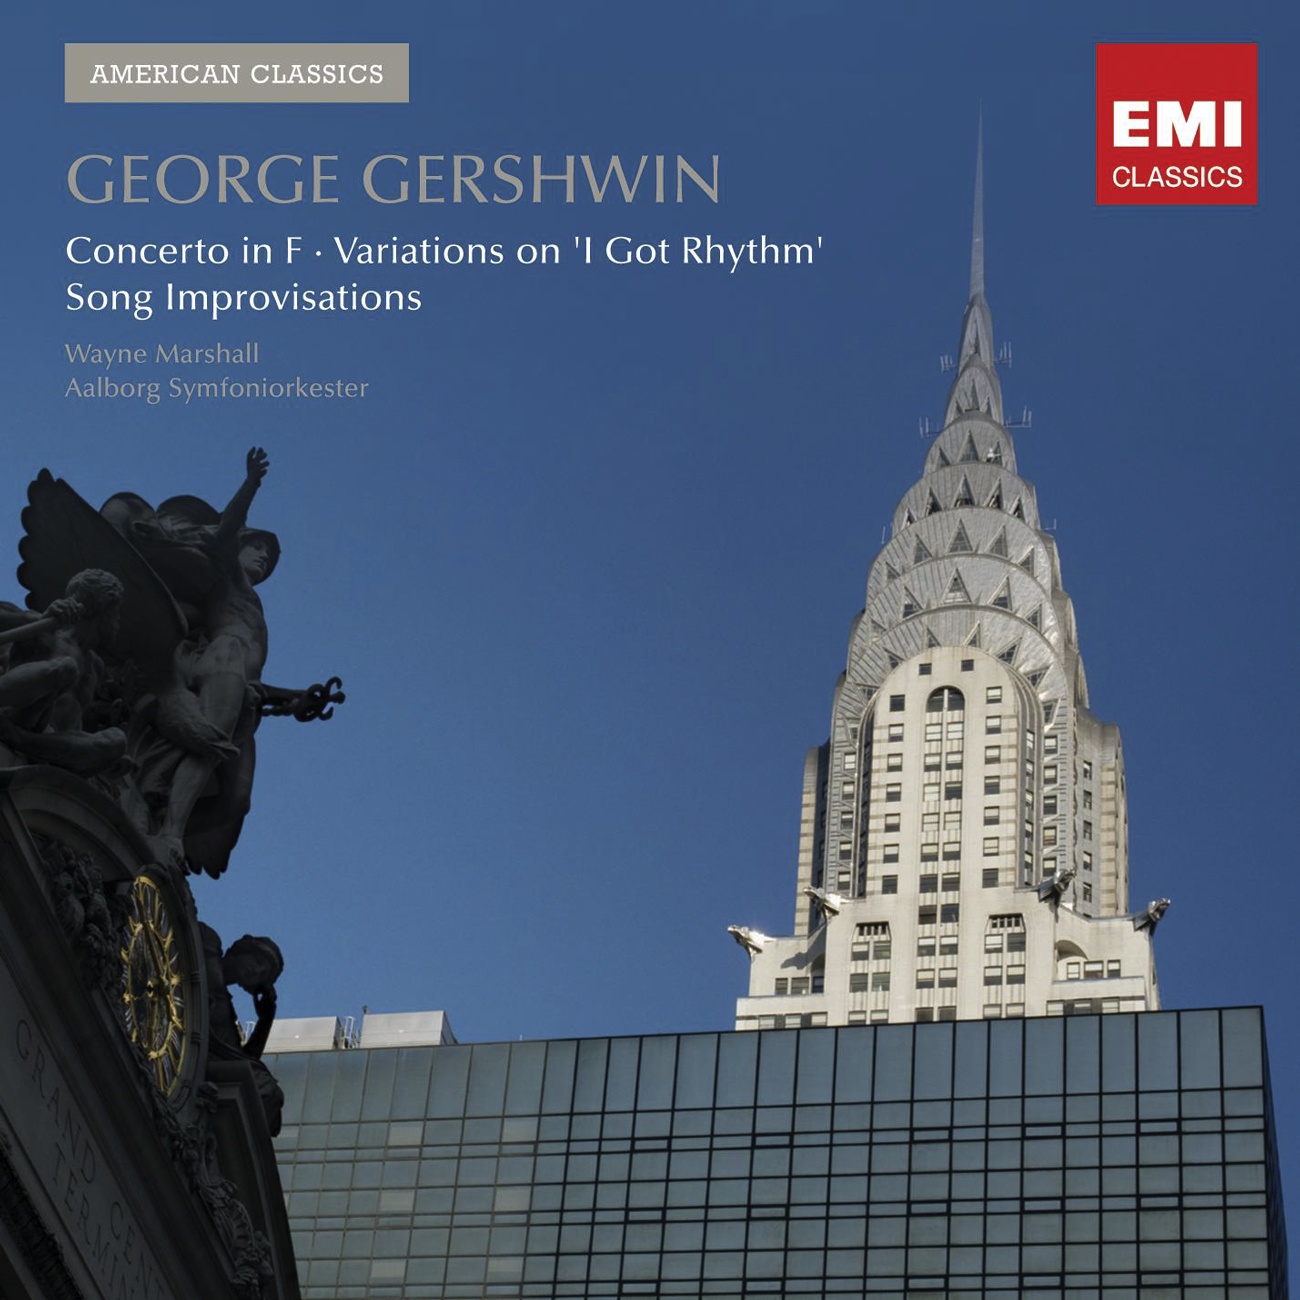 I got rhythm: Variations for piano and orchestra